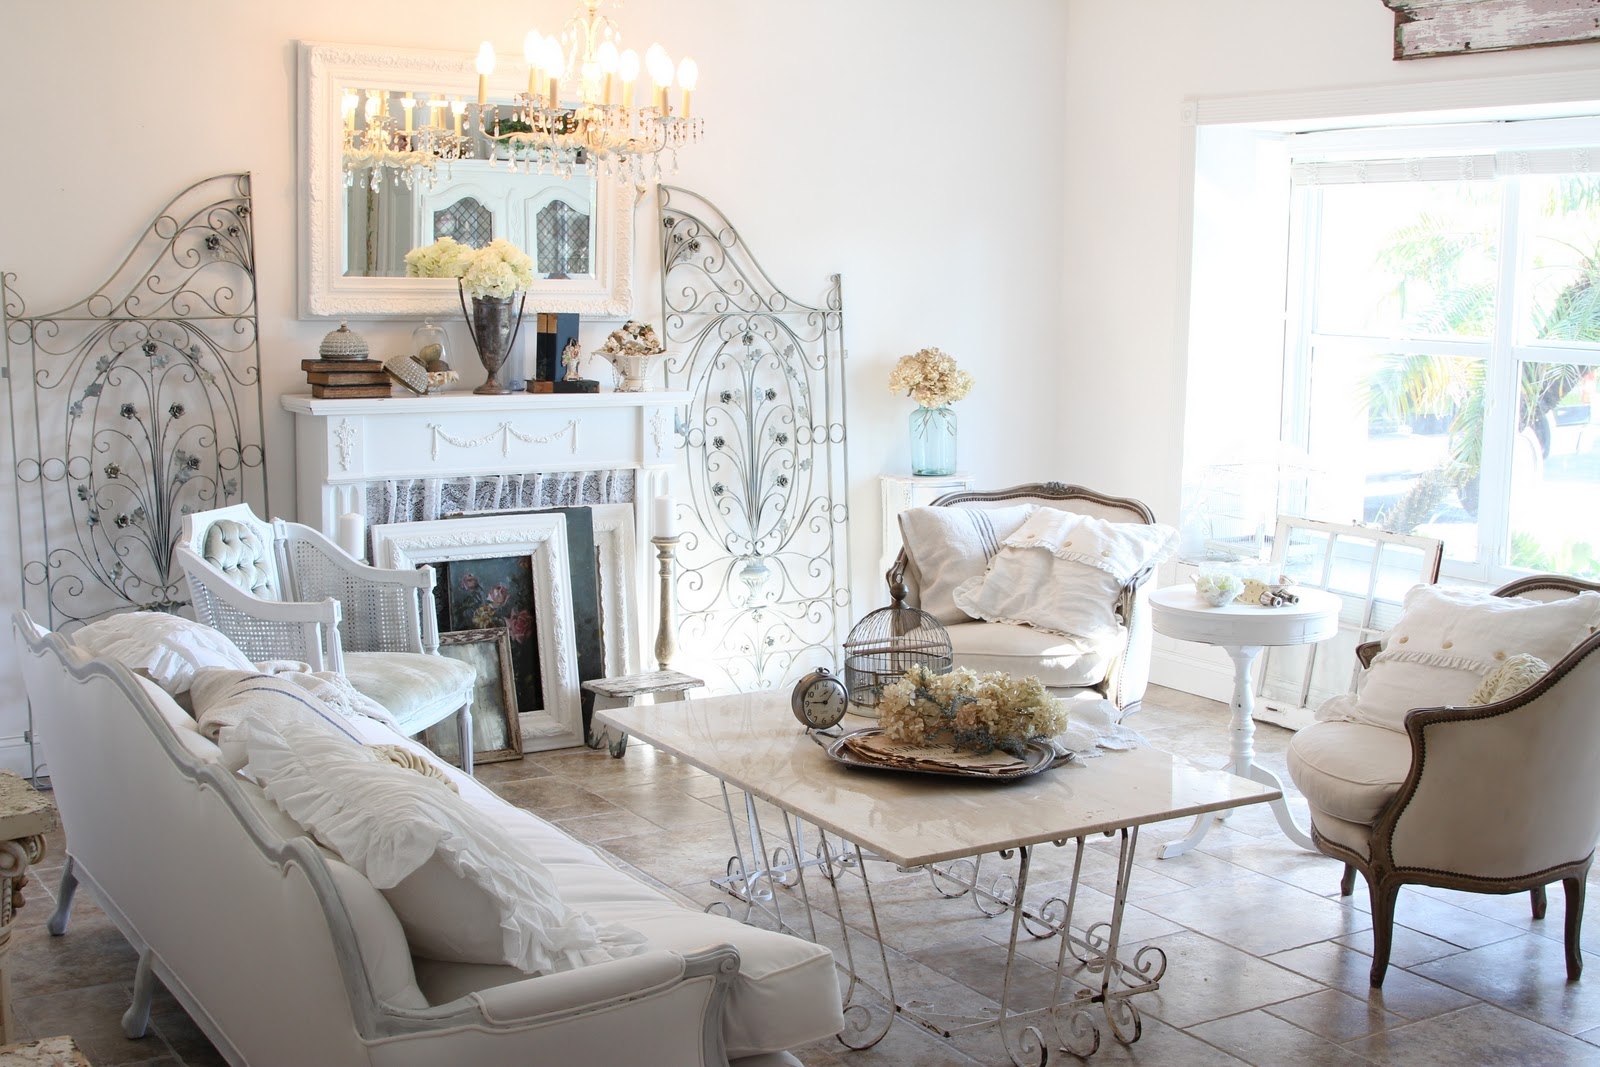 chic bedroom interior in the style of shabby chic